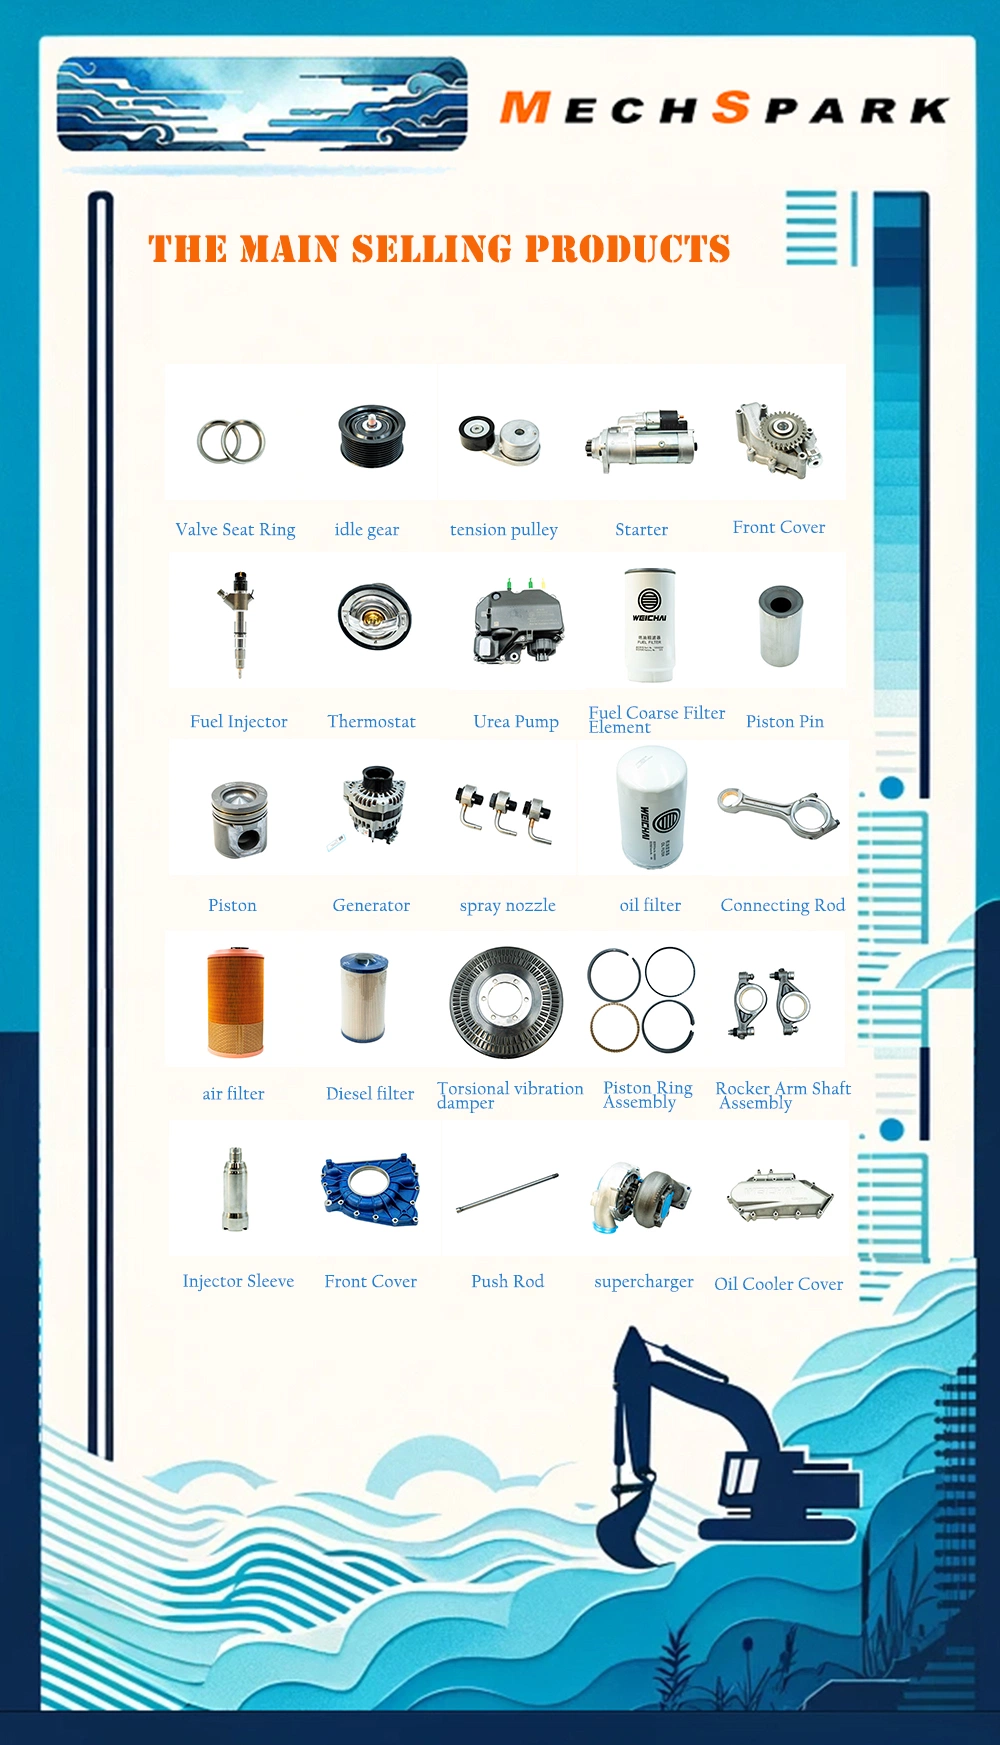 Wp13 Wechai Engine Parts for Sinotruk HOWO Trucks and Marine Engines, Including Generator and Diesel Engine Spare Parts